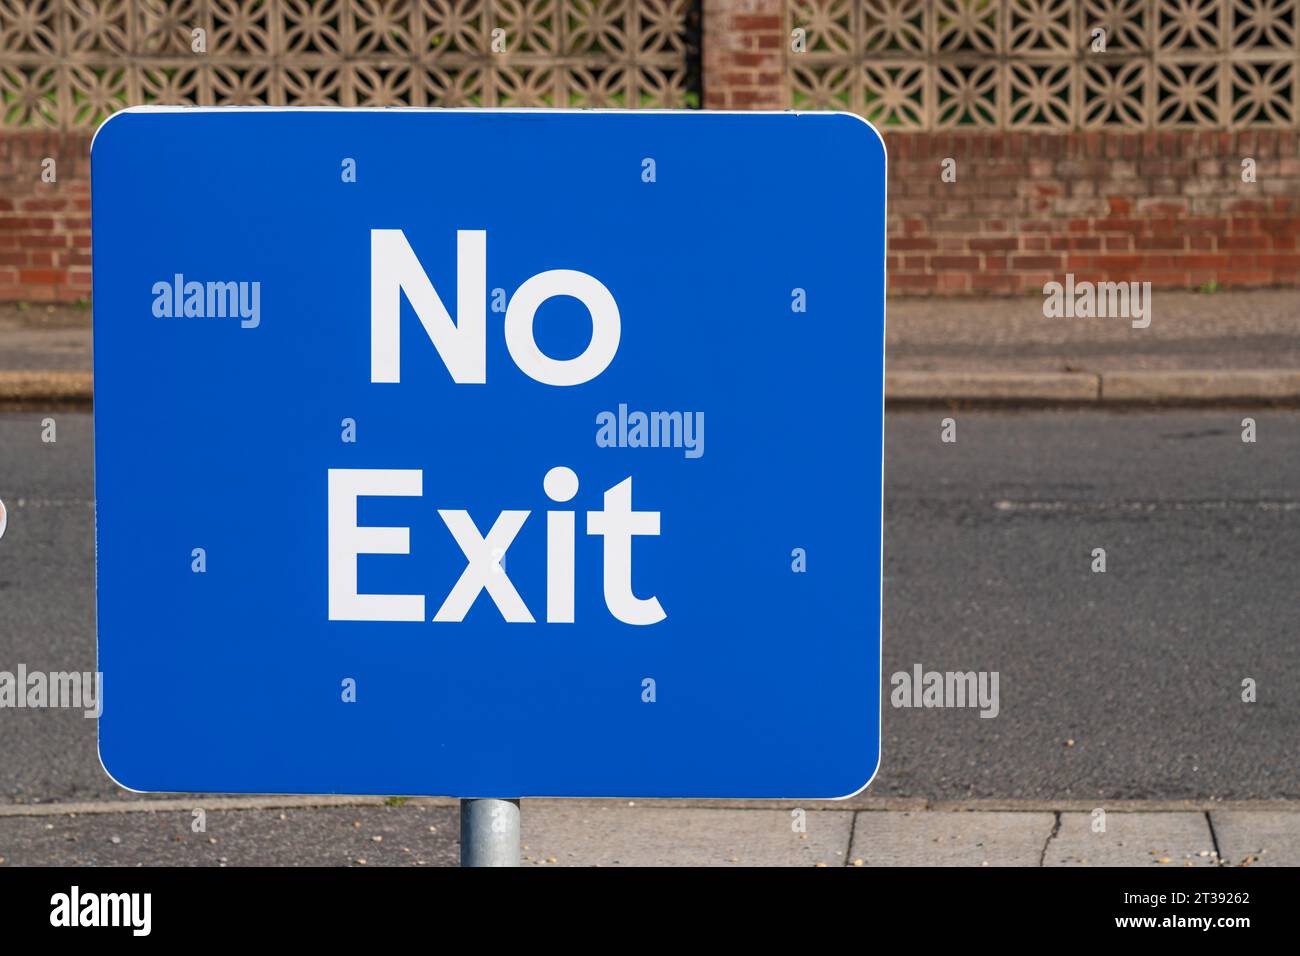 No exit sign in a car park Stock Photo